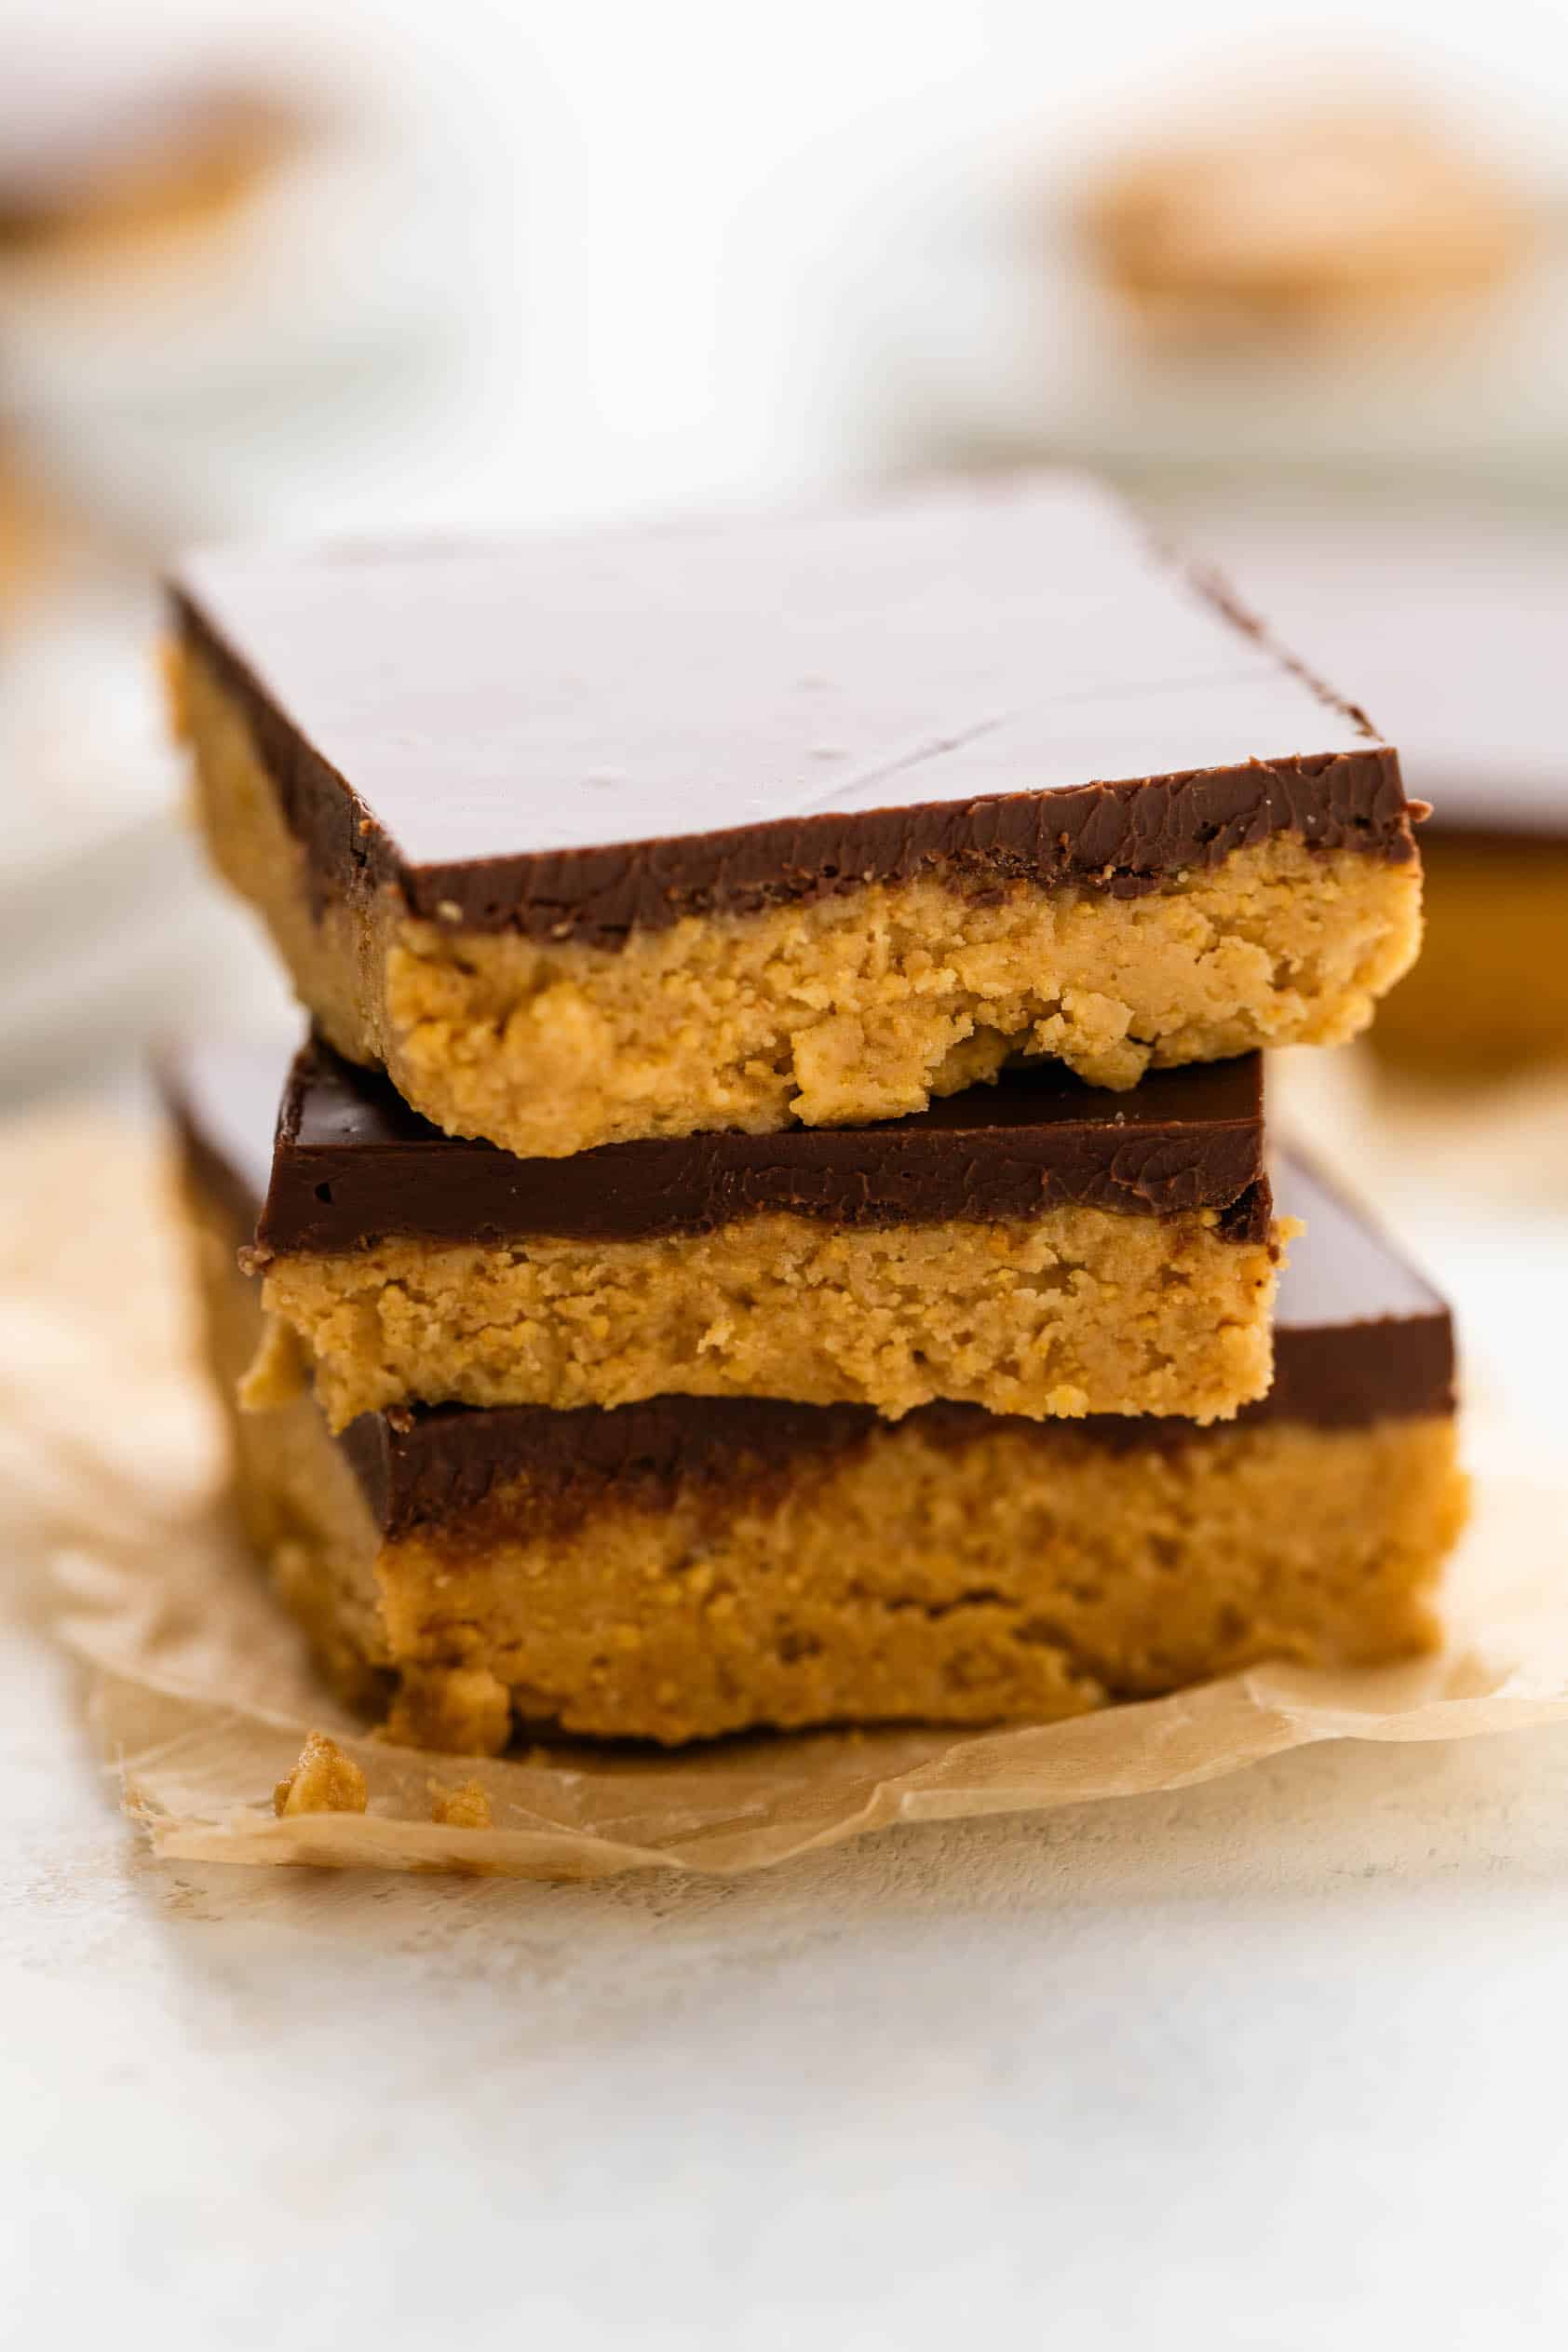 Peanut butter bars topped with chocolate.